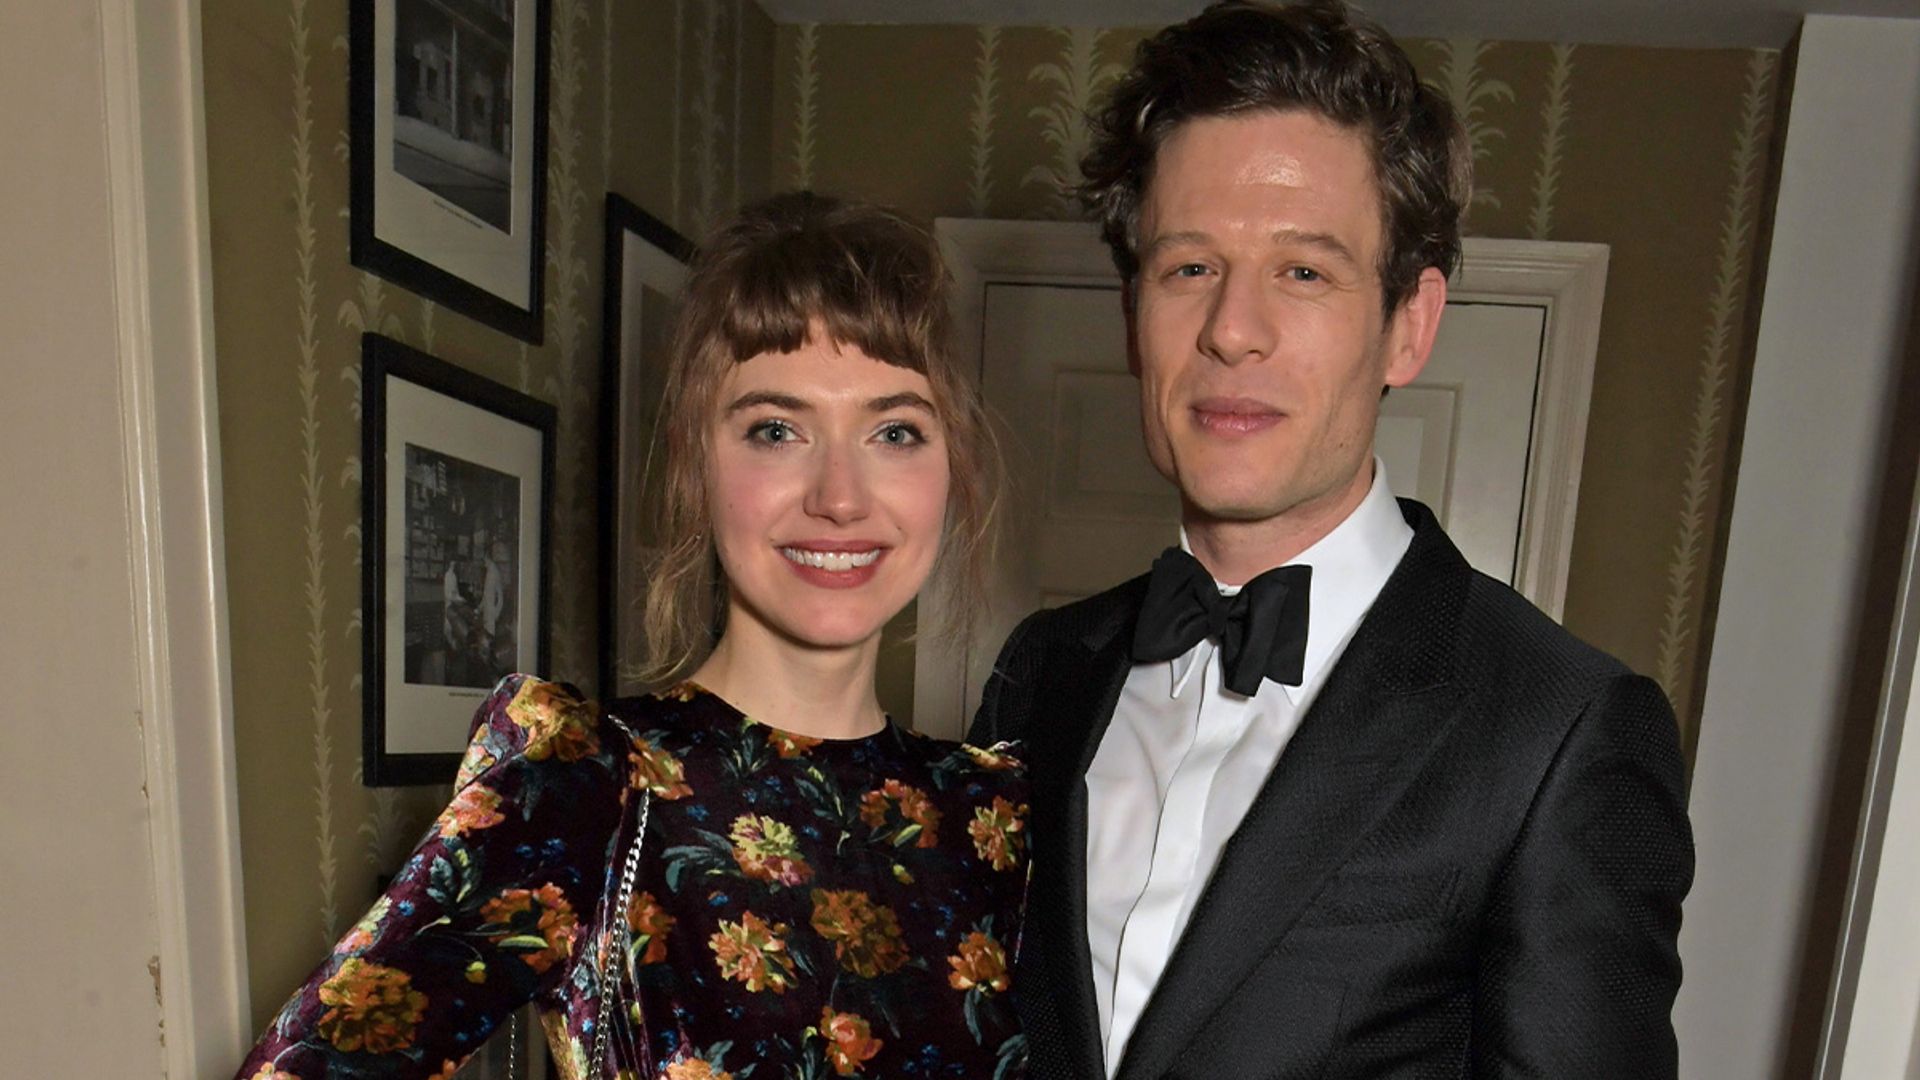 Happy Valley's James Norton's ultra-private quirky home with famous fiancée